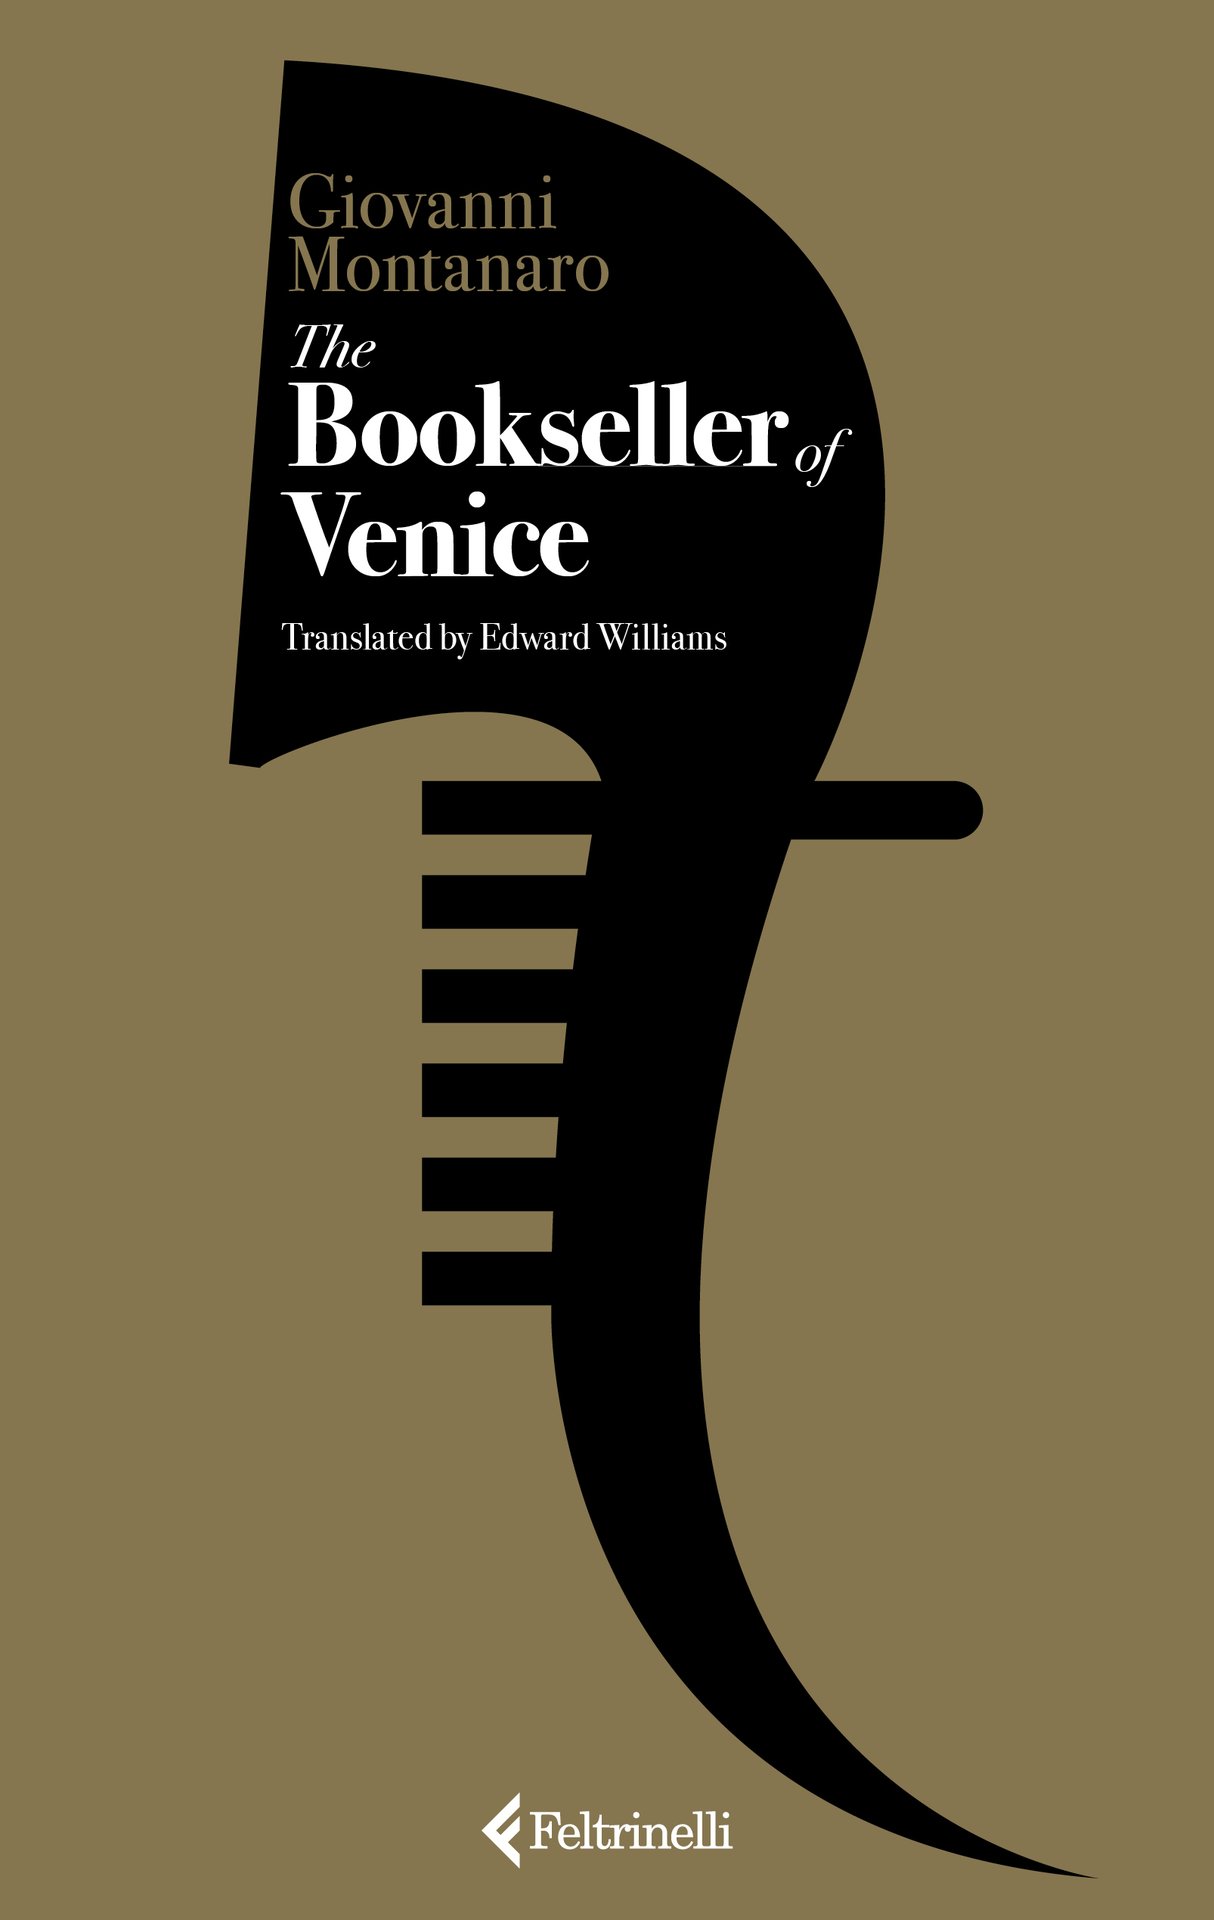 The Bookseller of Venice